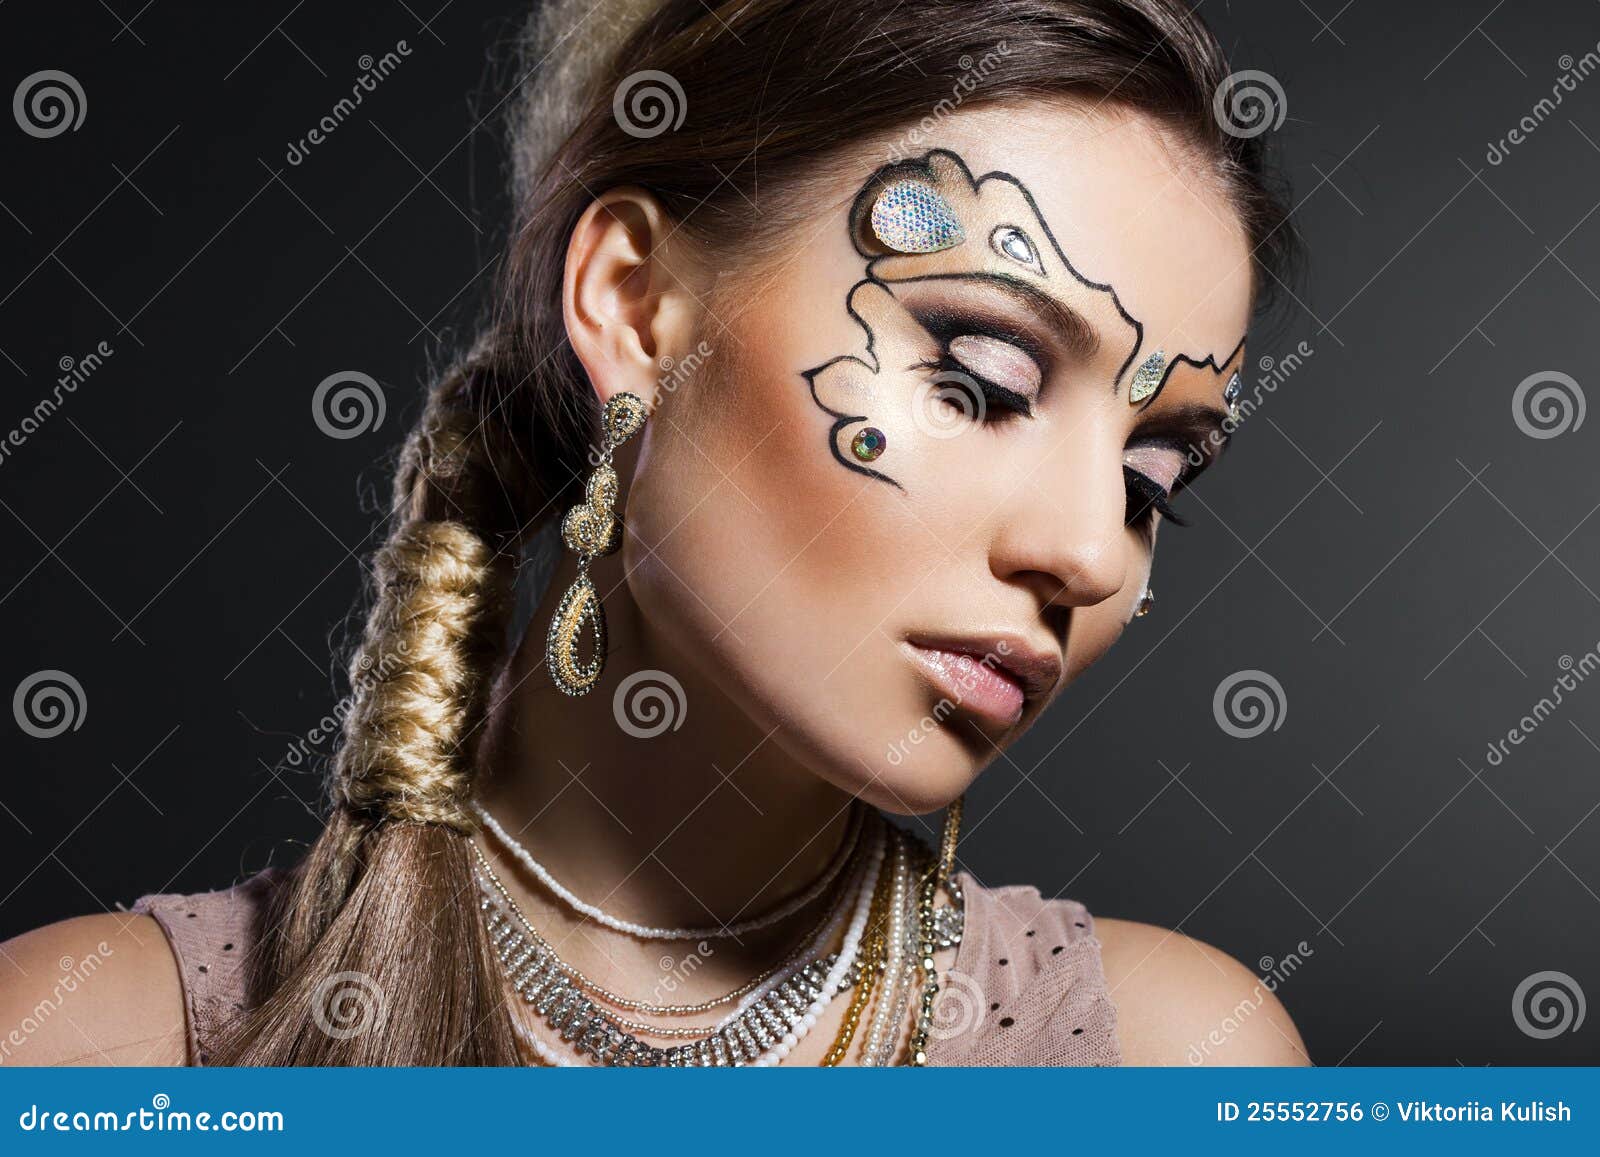 woman with art visage